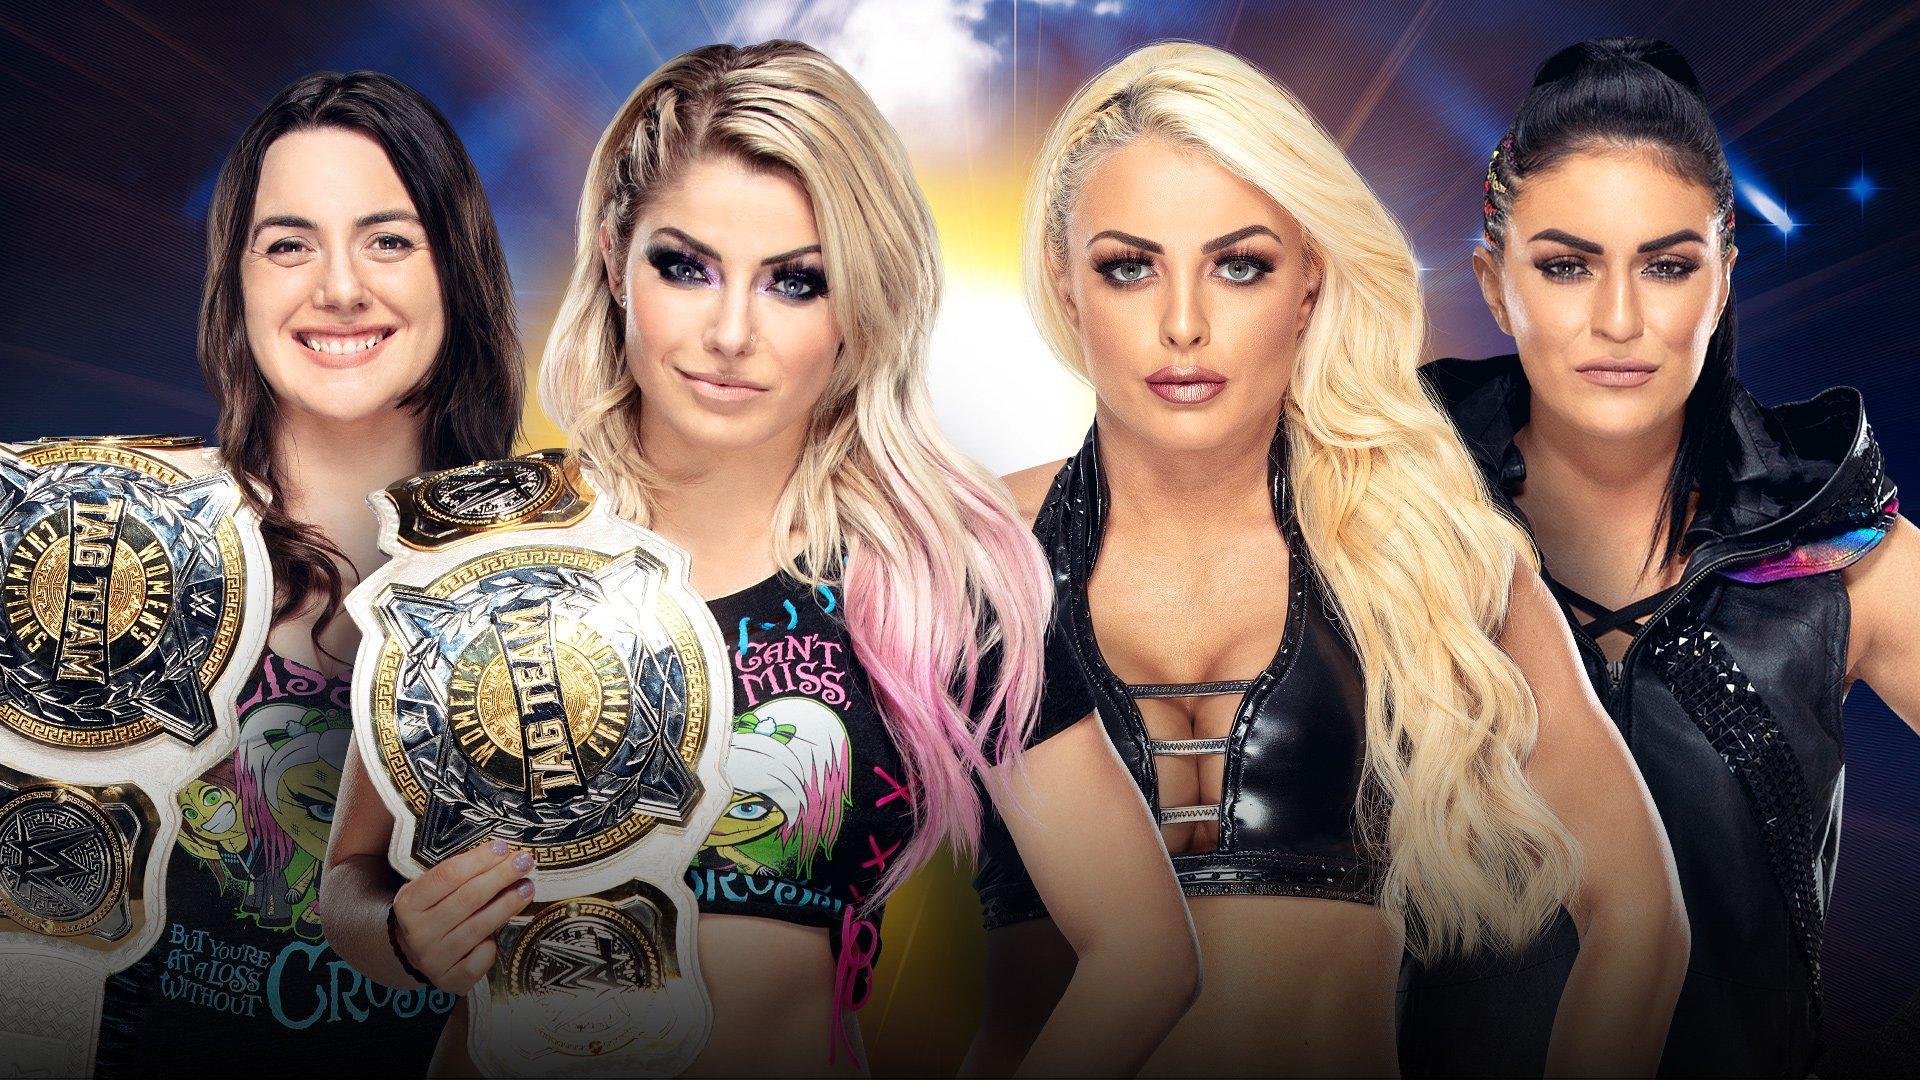 Women's Tag Team title match set for WWE Clash of Champions